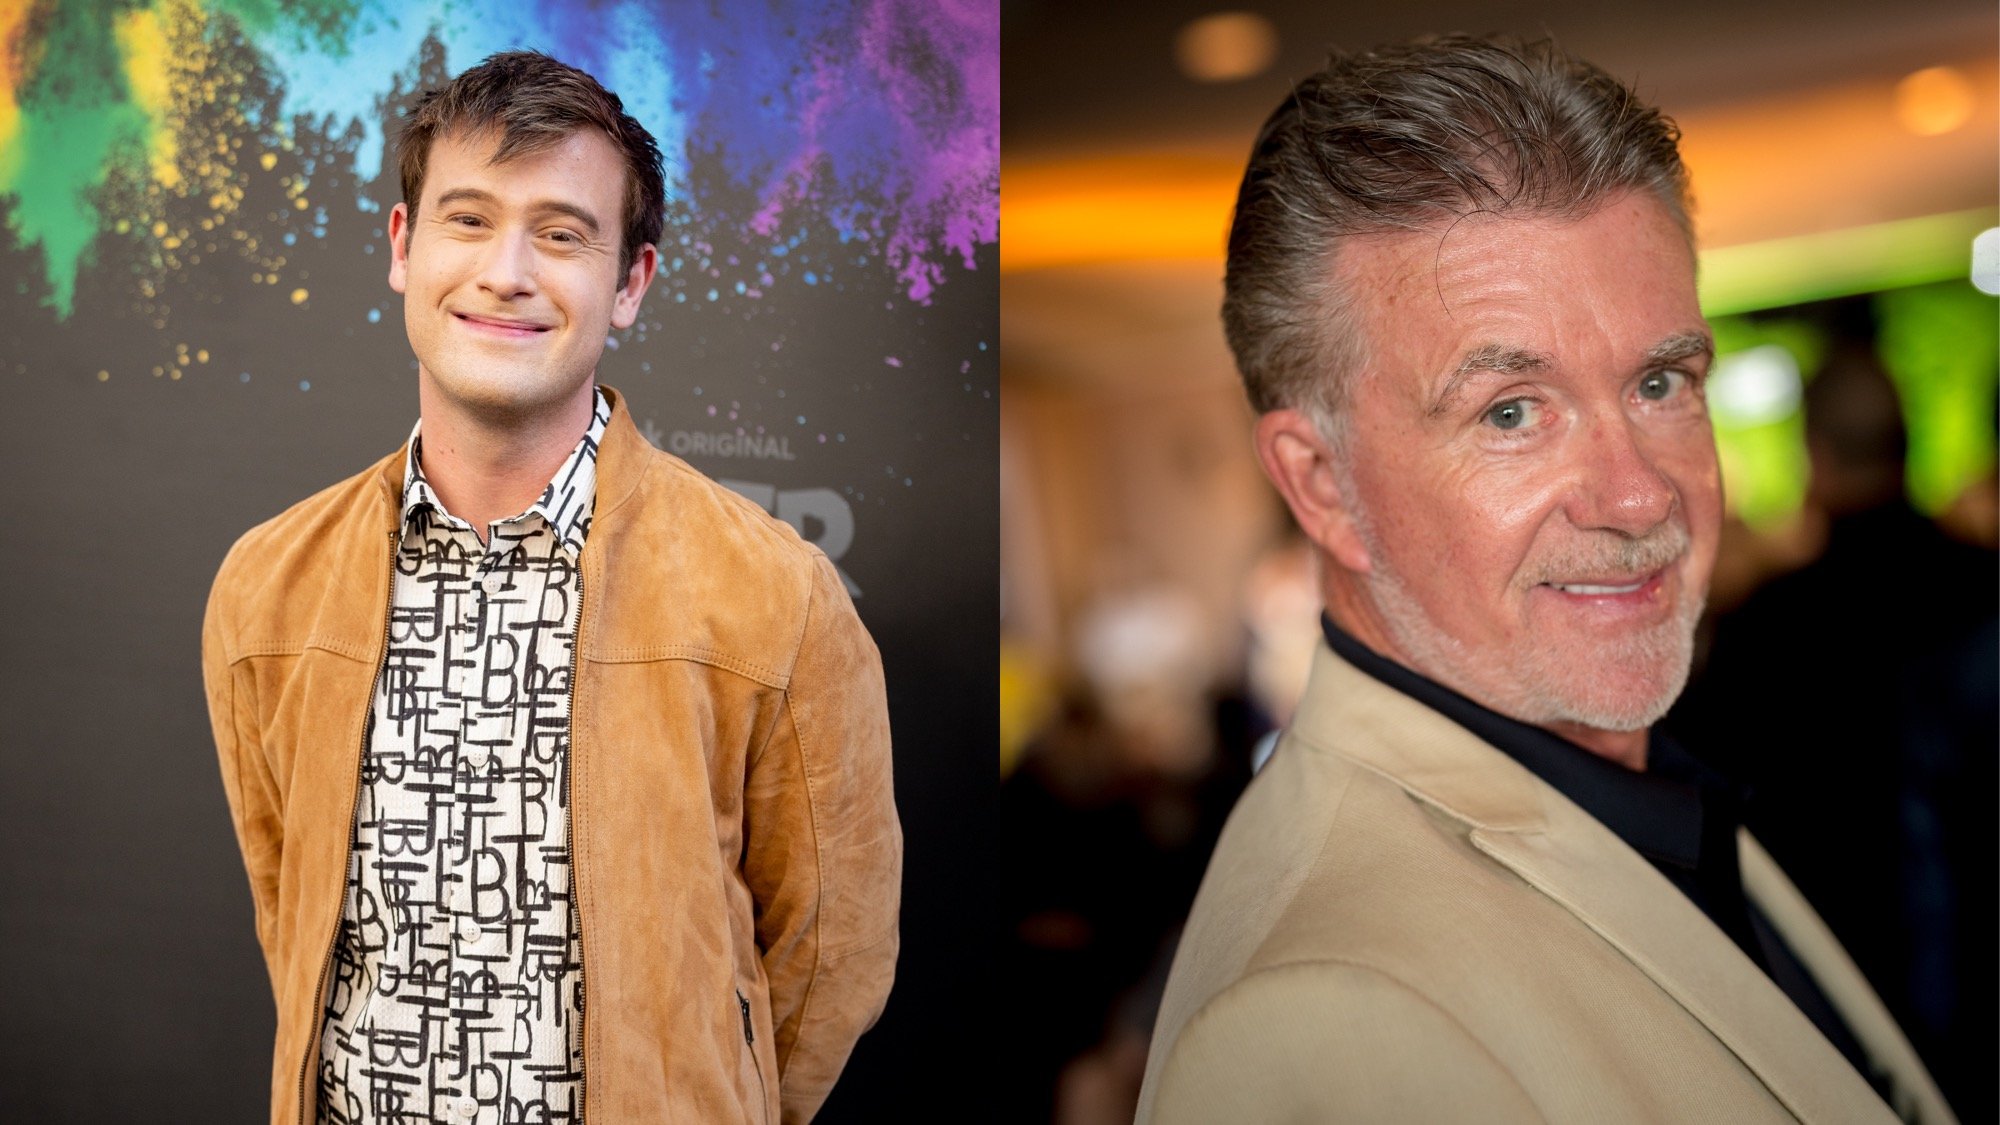 Tyler Henry (L) shared a chilling warning with Alan Thicke (R) before he died.